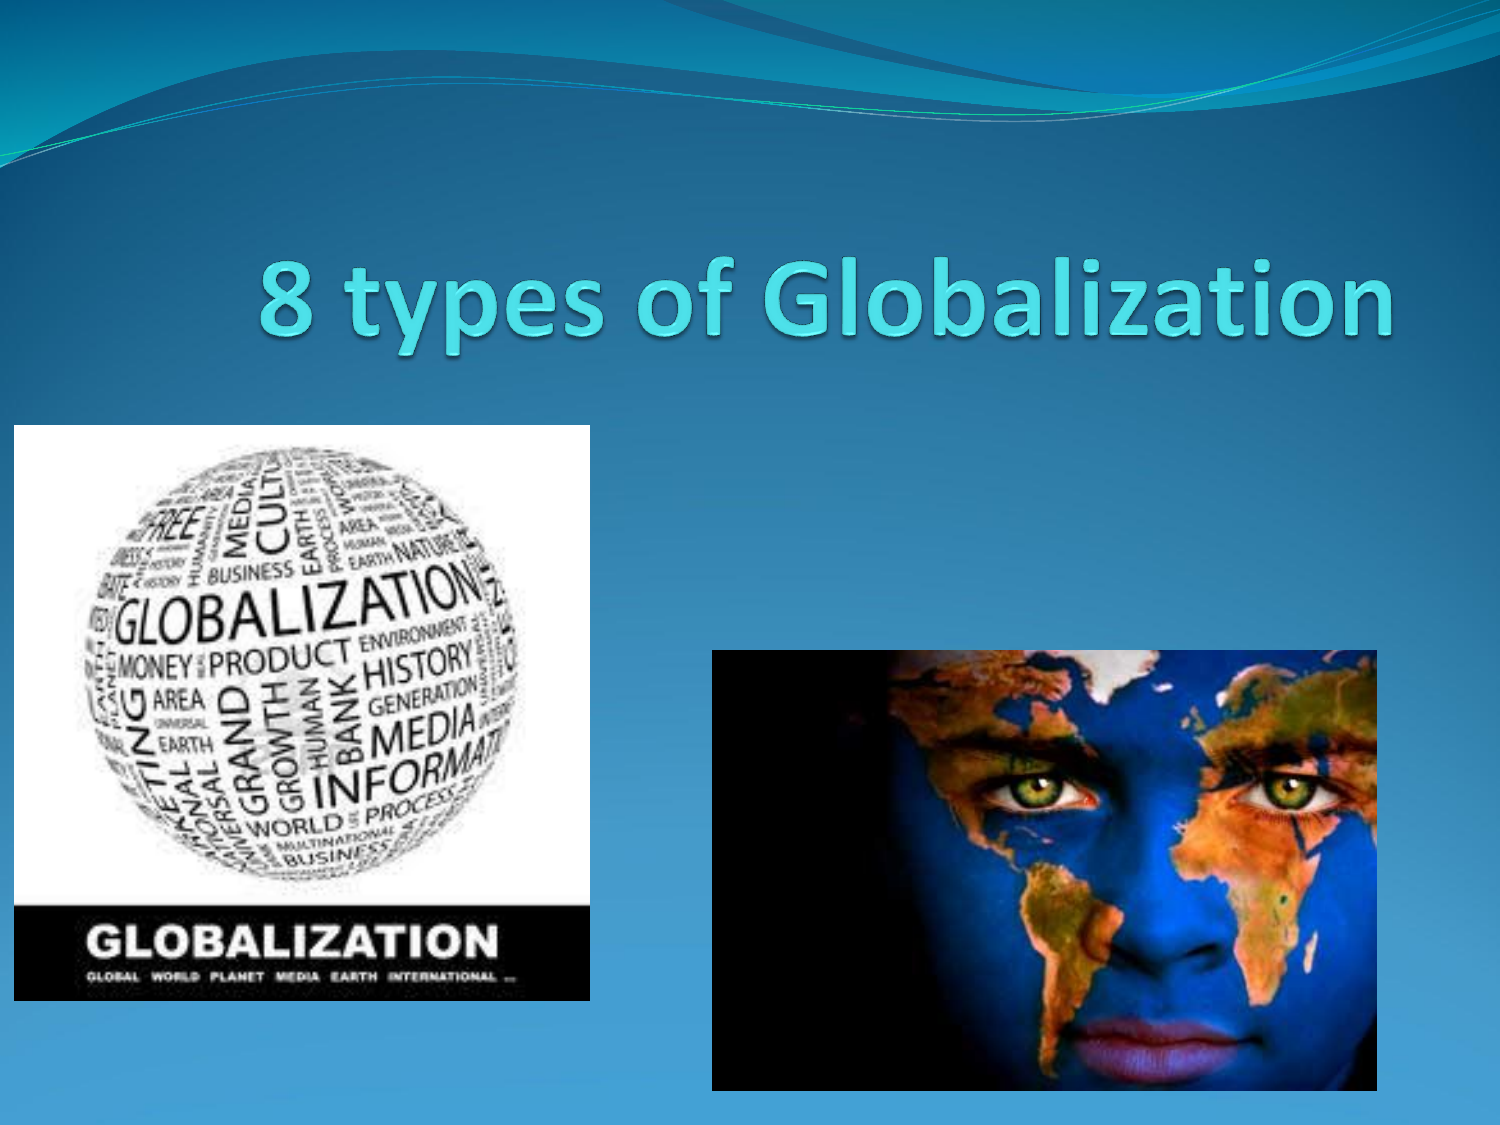 the globalization of cities leads to